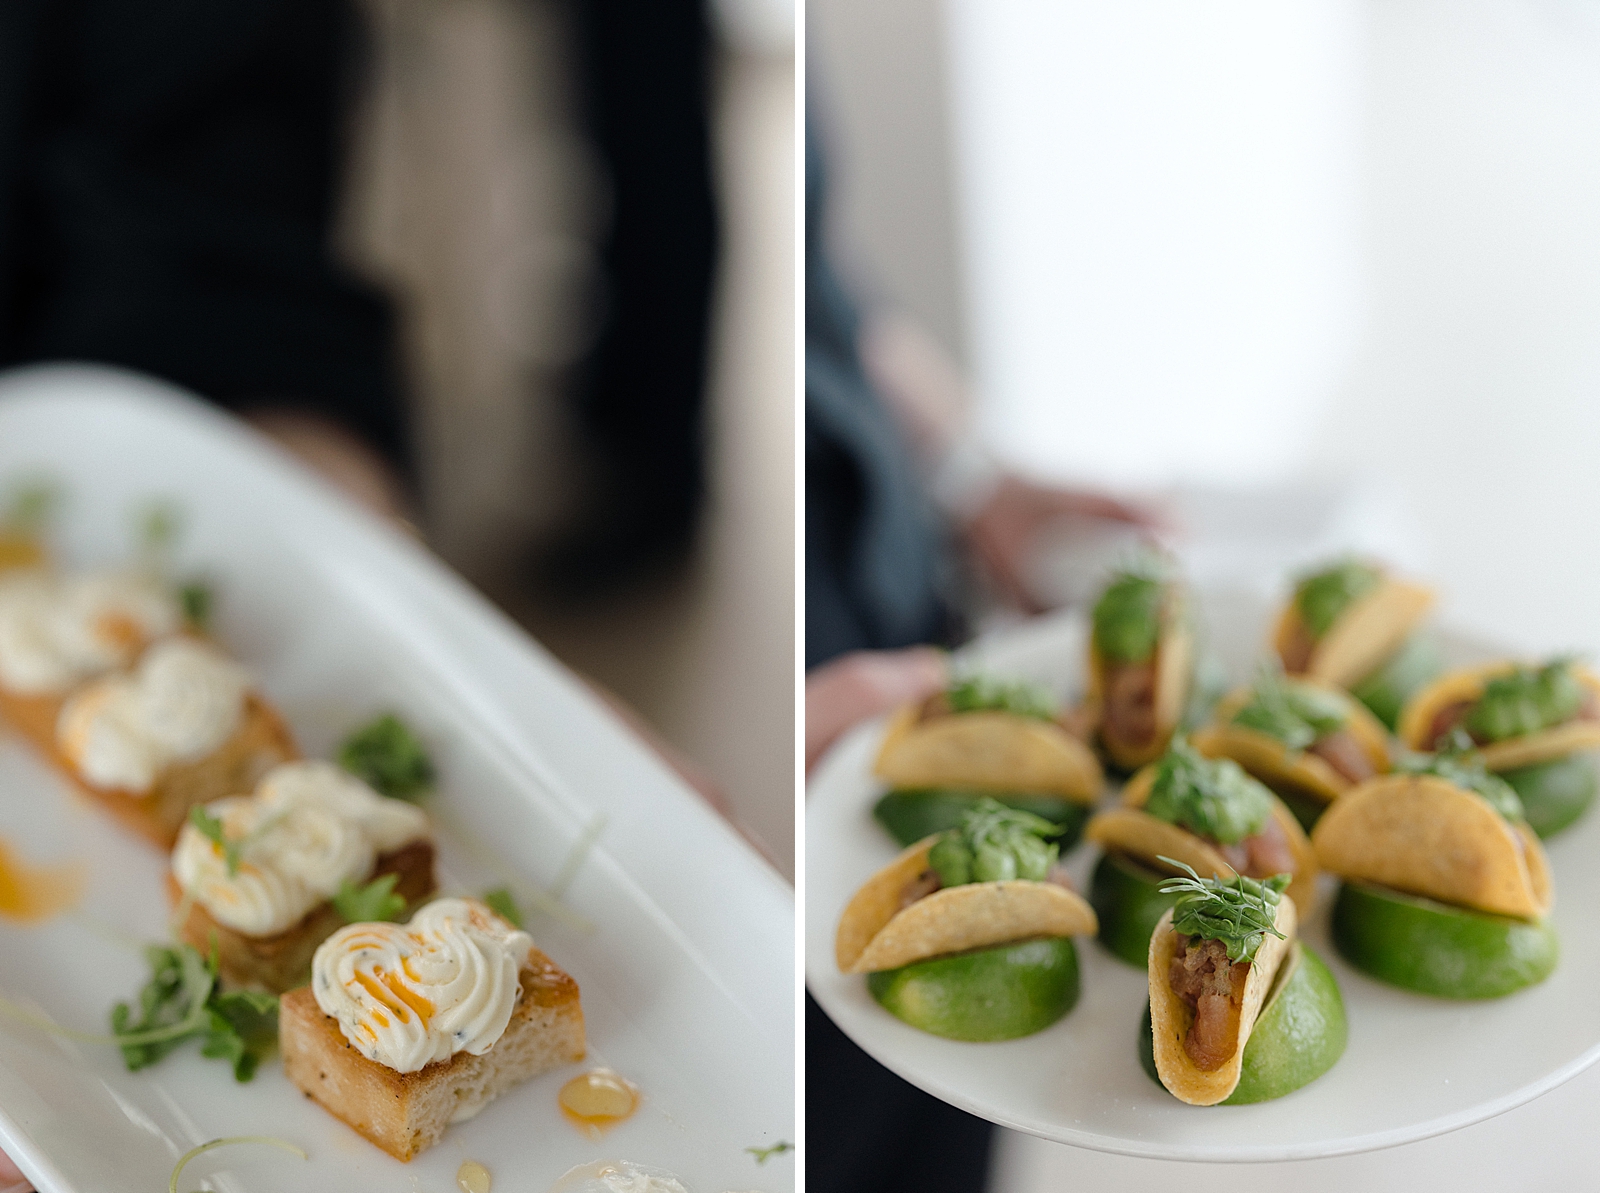 Left photo: Close up shot of hors d'oeuvres being served on a tray.
Right photo: Close up shot of hors d'oeuvres being served on a tray. 